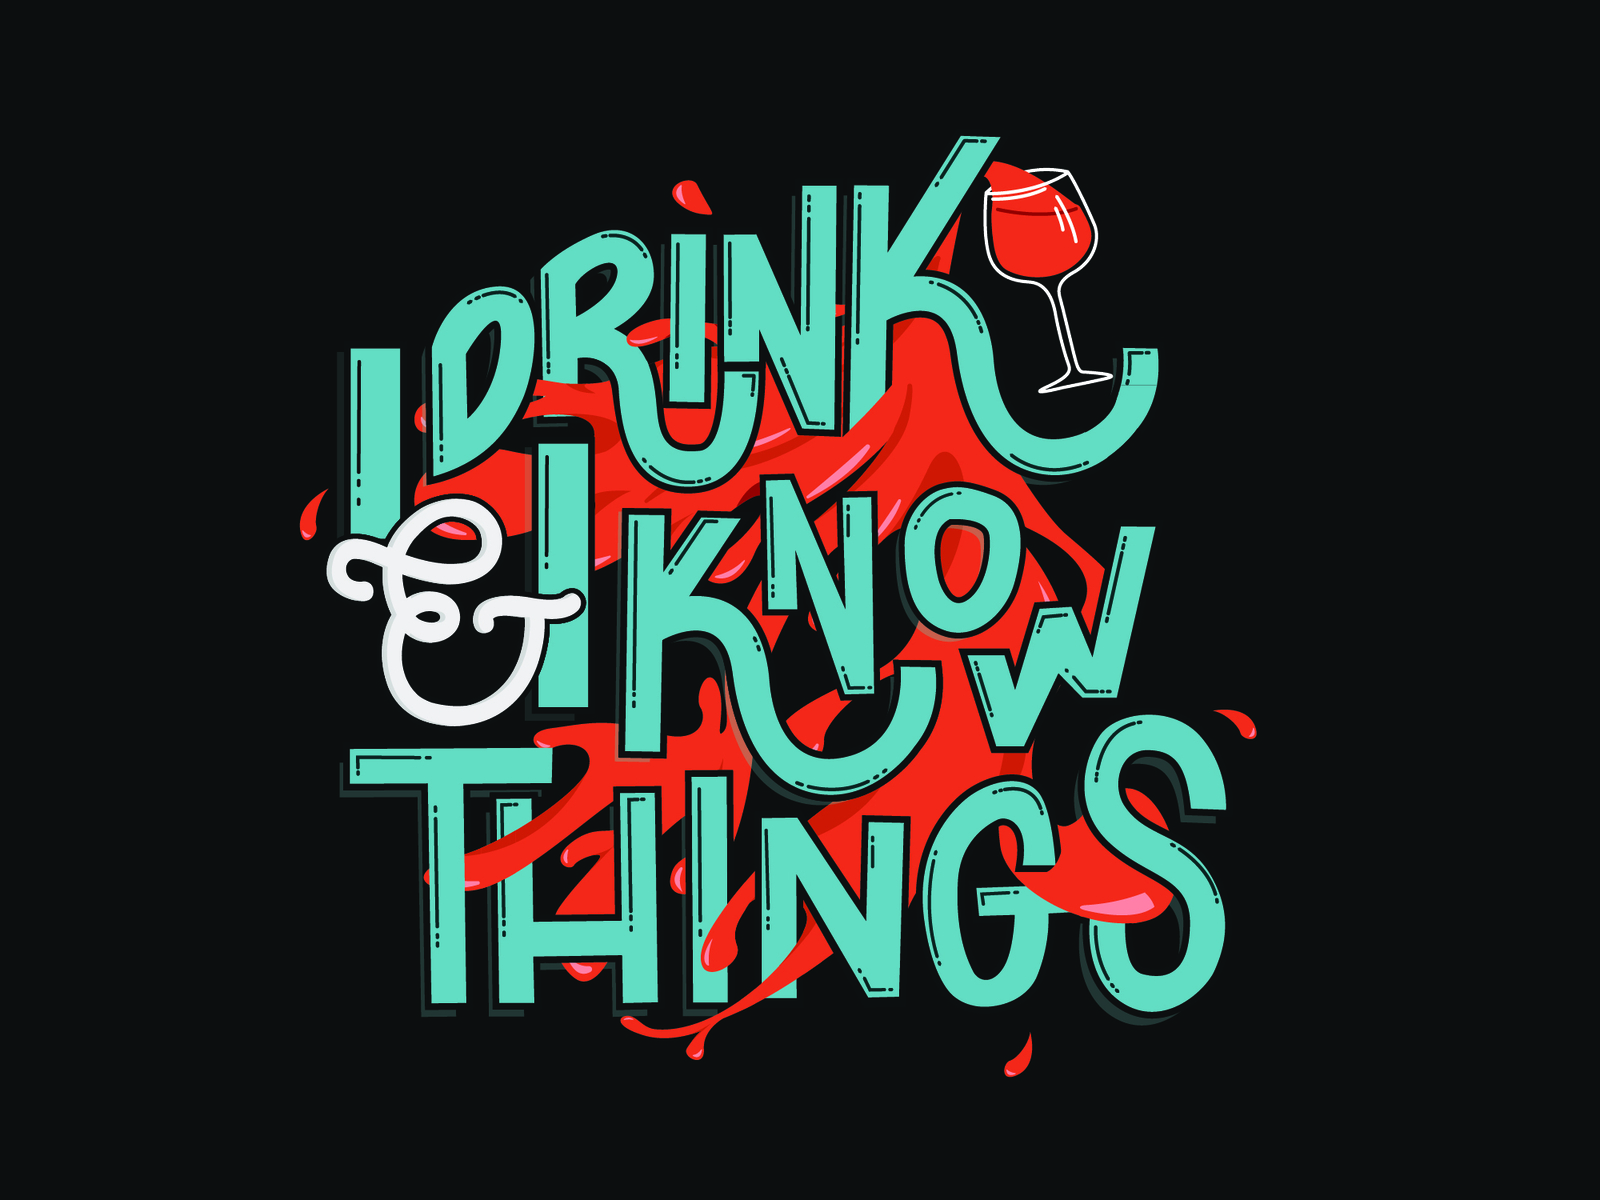 I Drink & I Know Things by Sam Chase on Dribbble